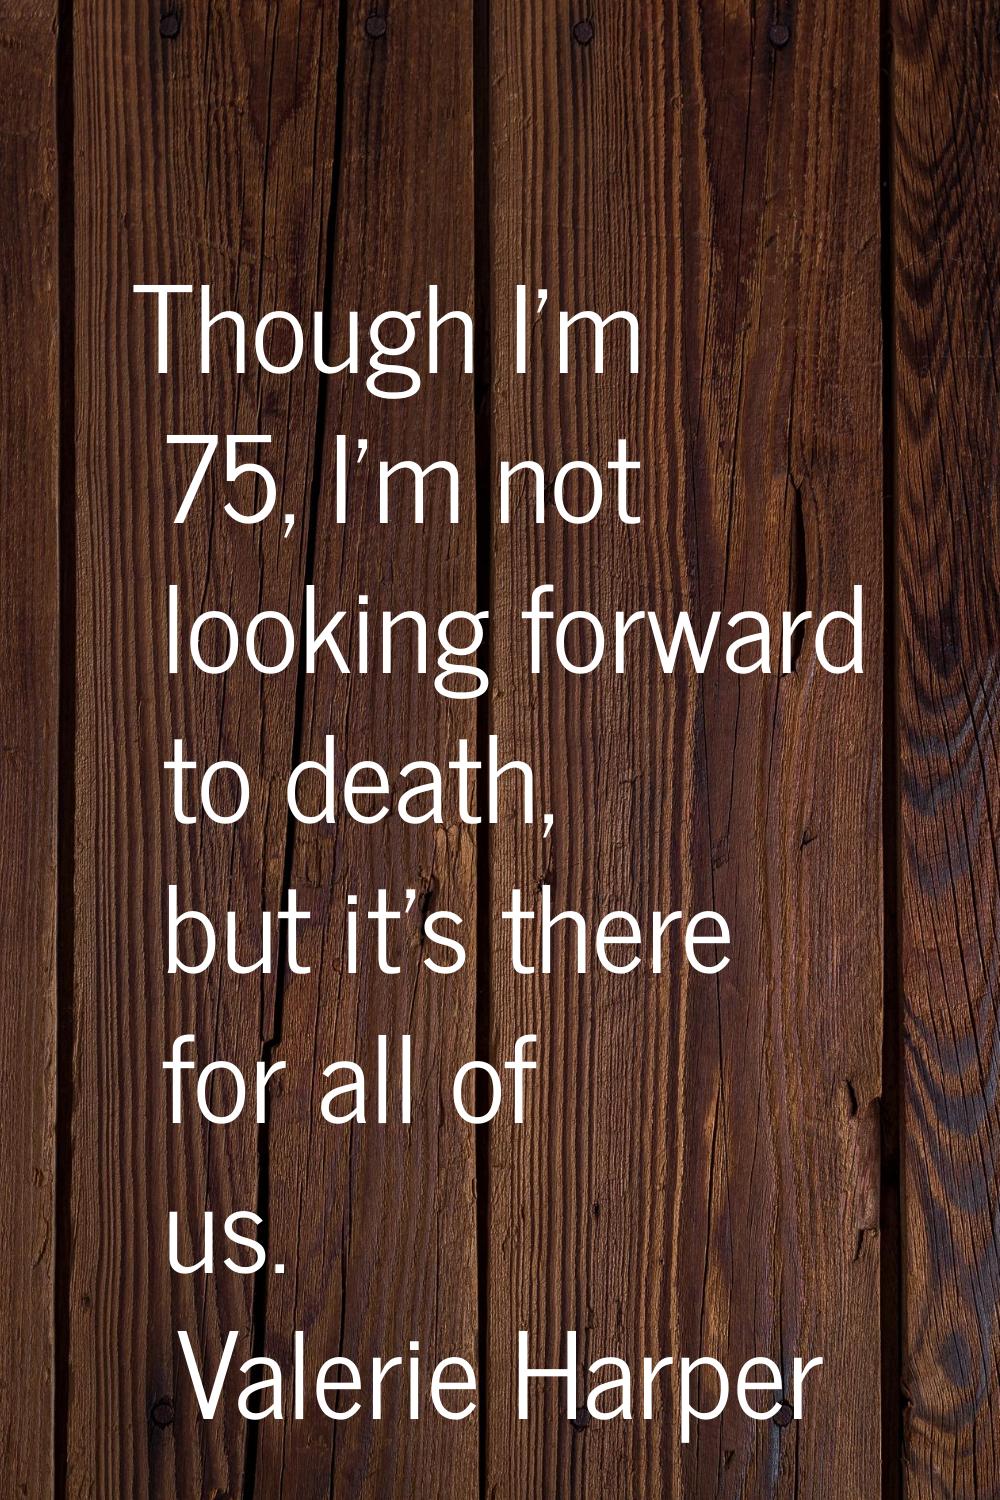 Though I'm 75, I'm not looking forward to death, but it's there for all of us.